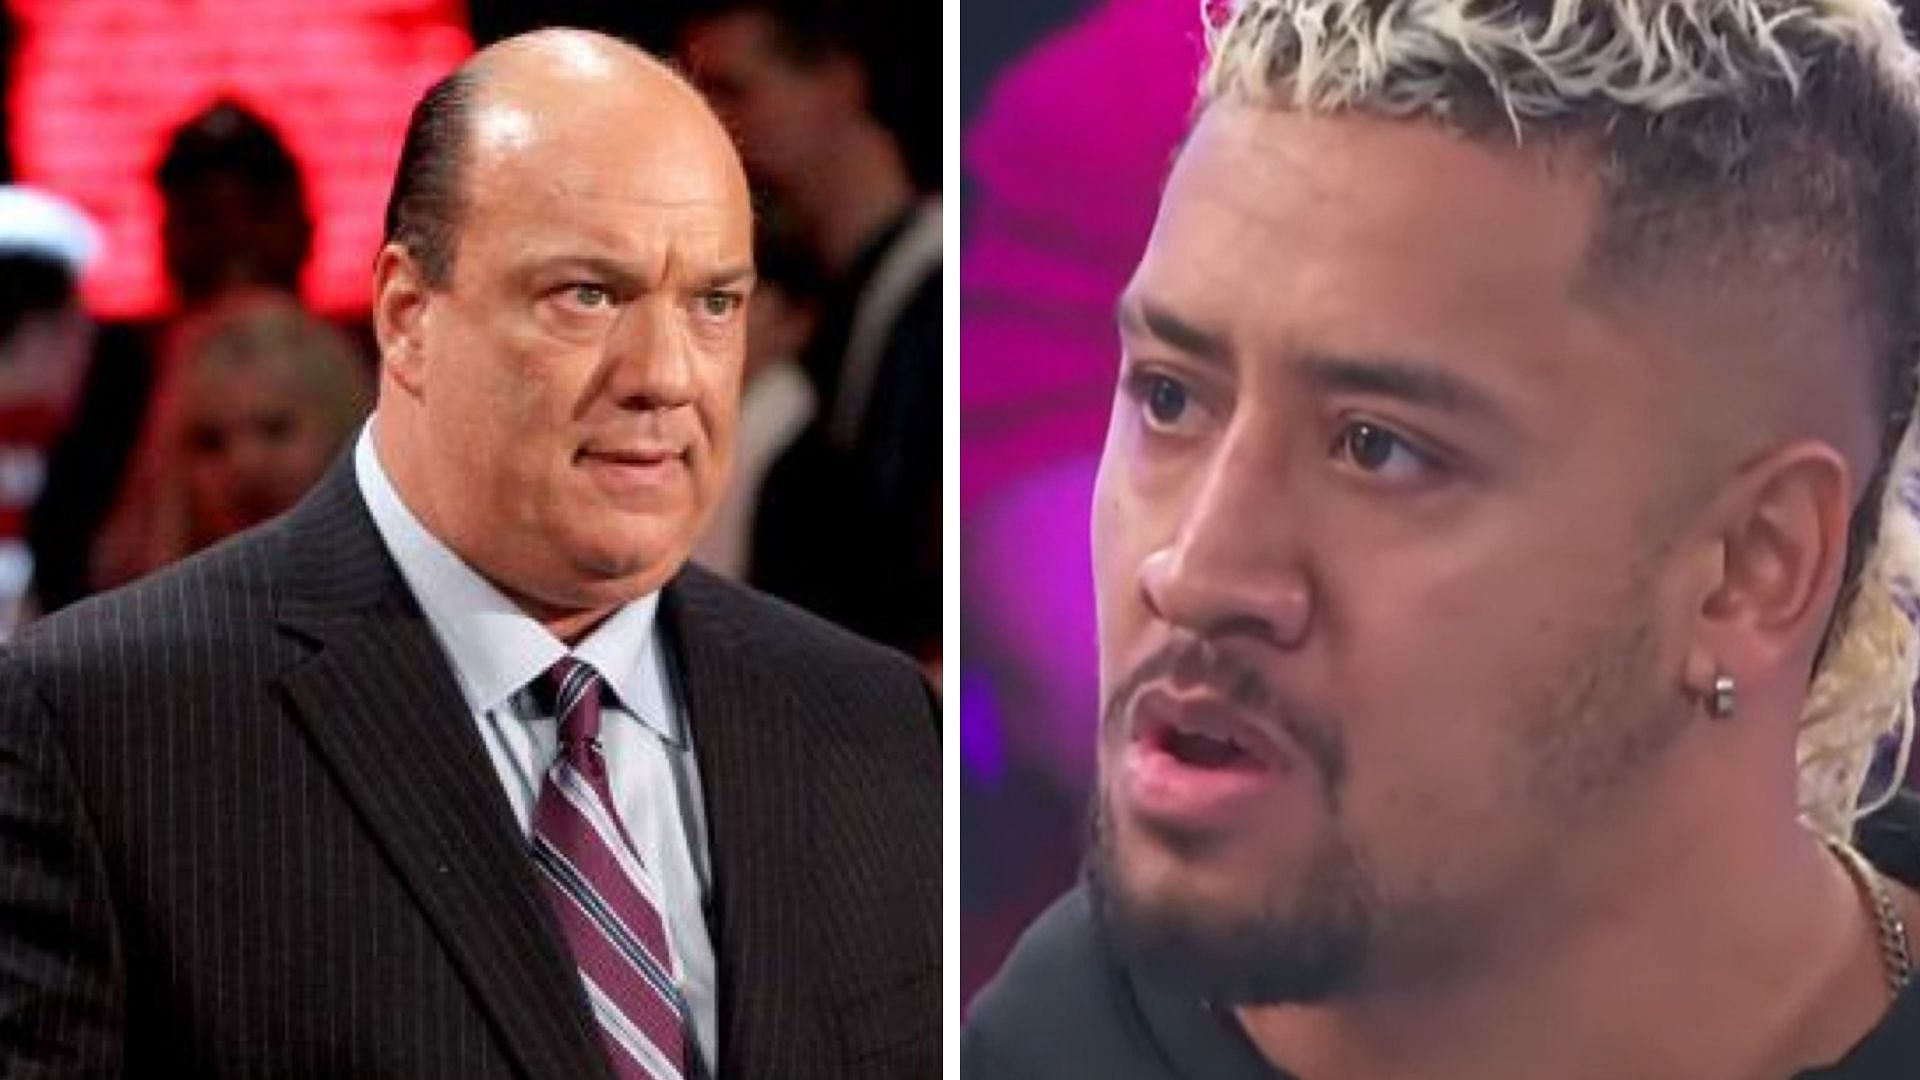 Paul Heyman on the left and Solo Sikoa on the right